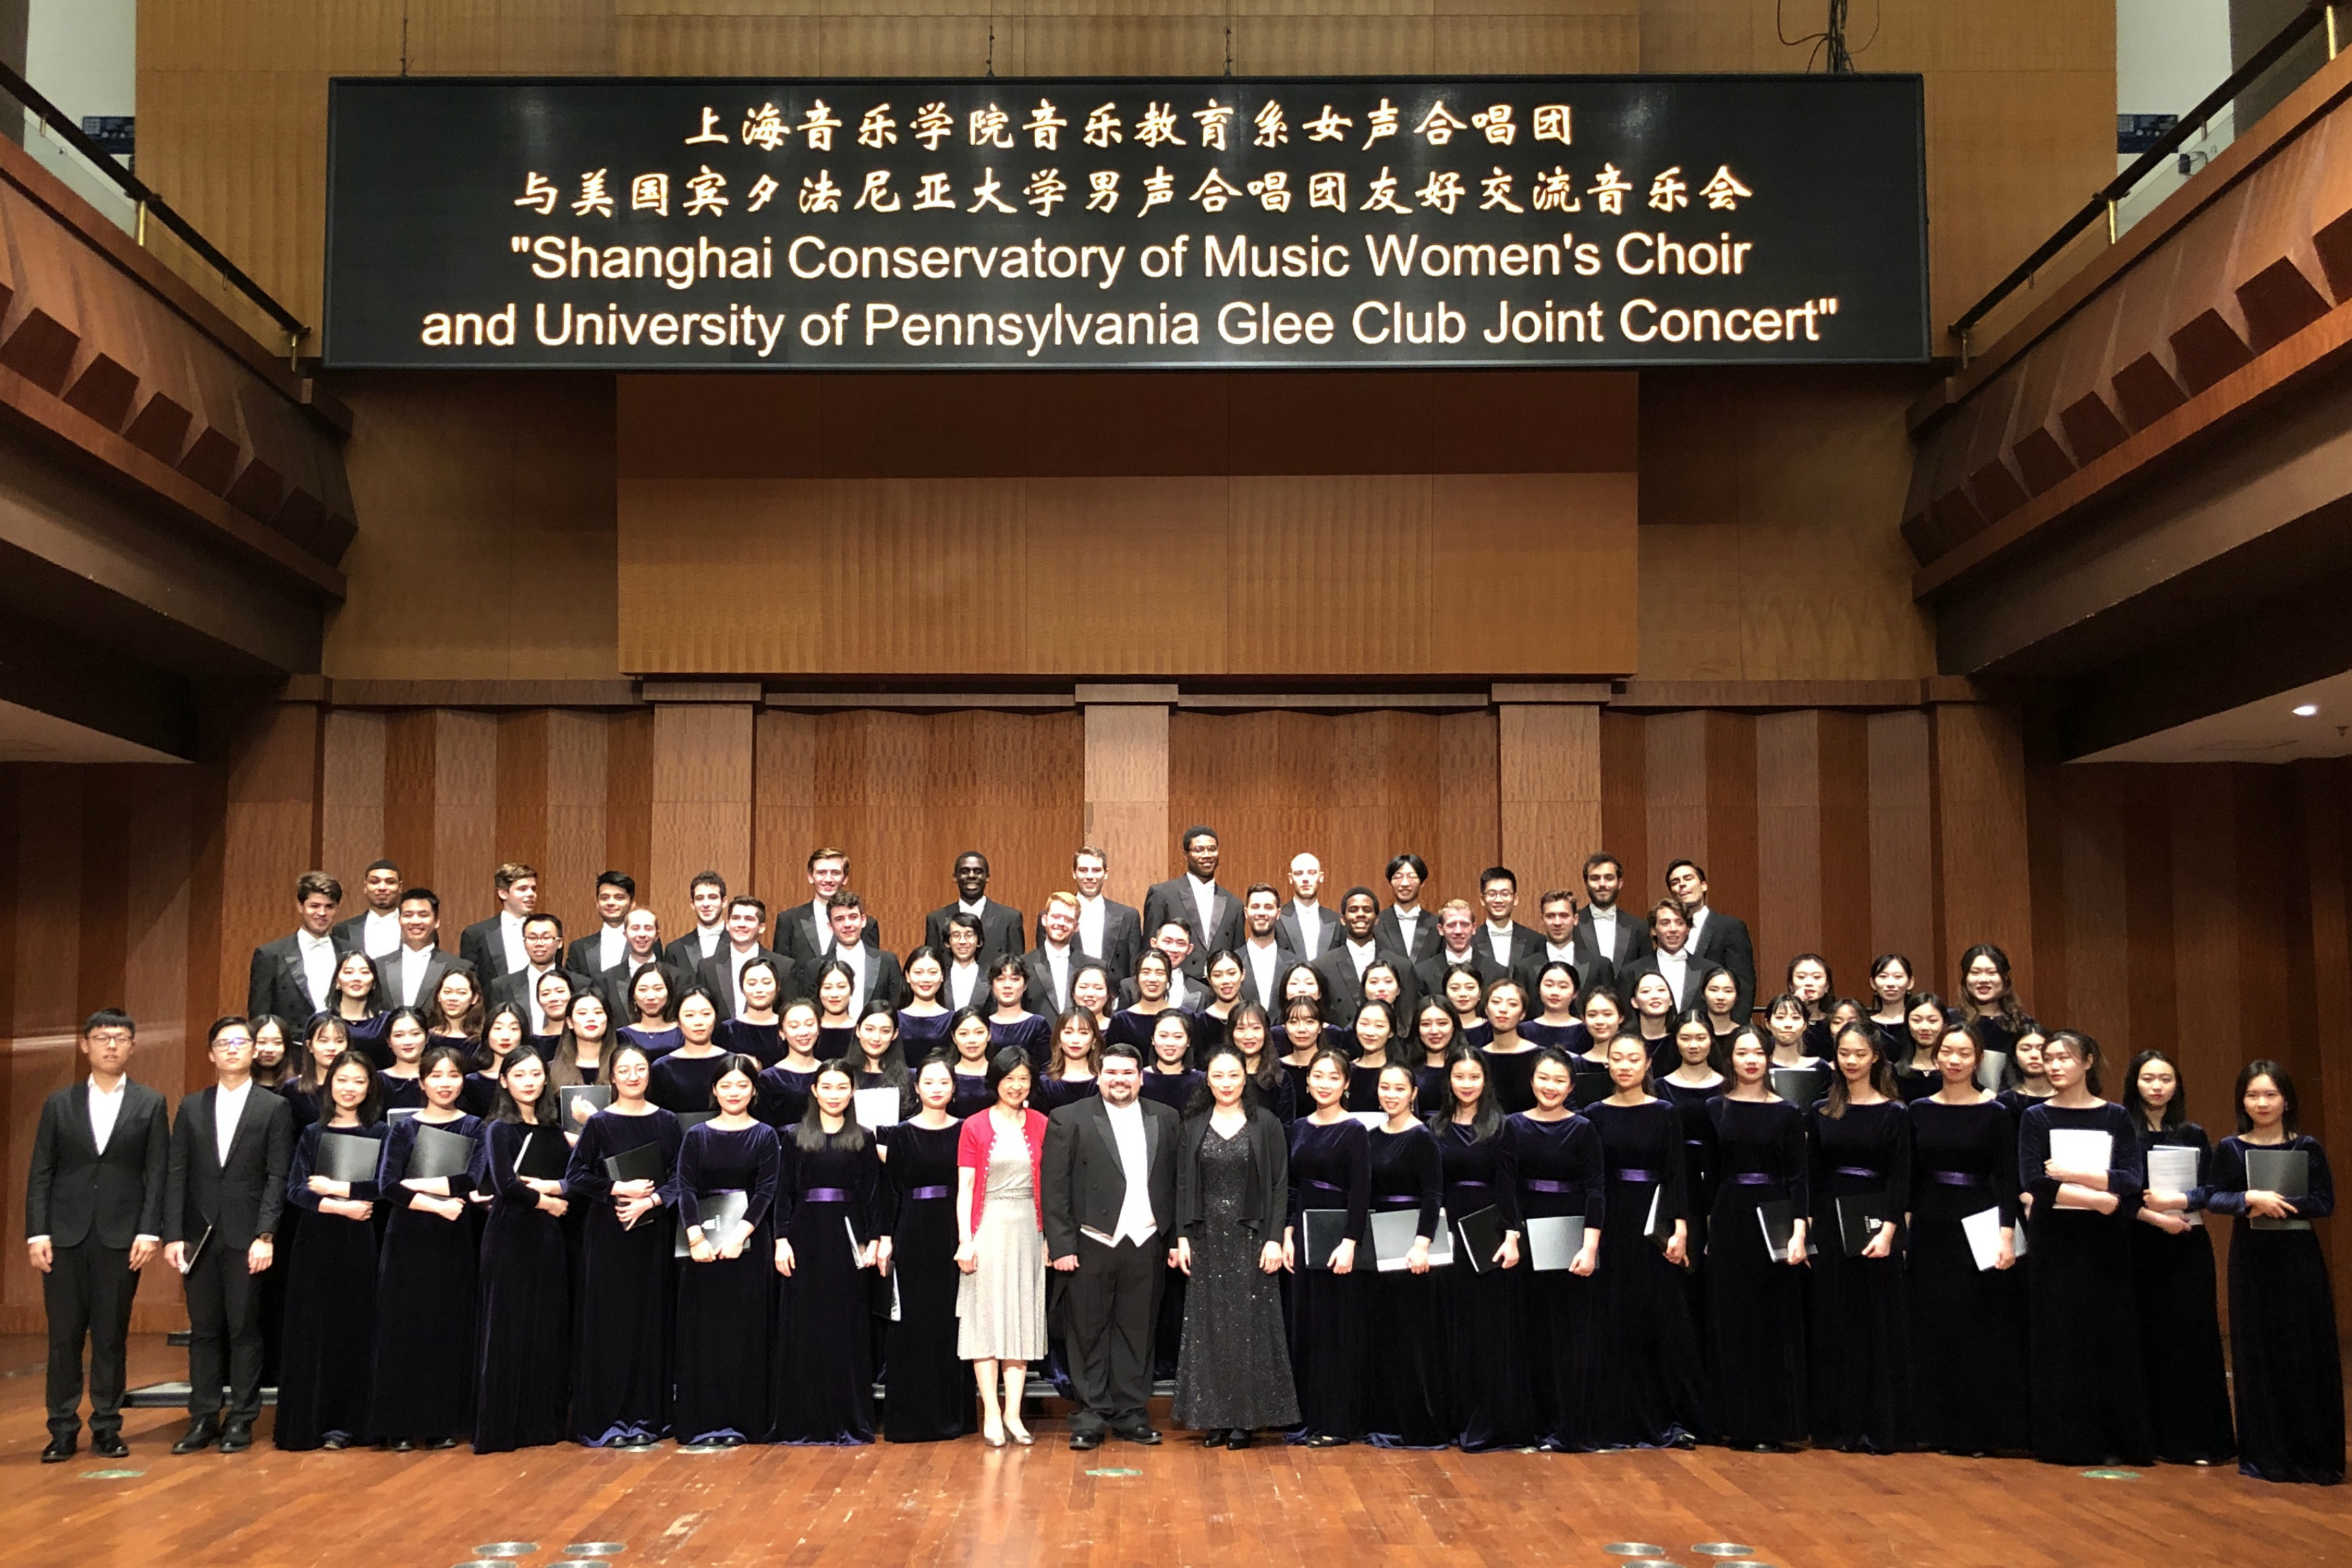 Concert with many people assembled on stage on risers dressed in formal attire. 